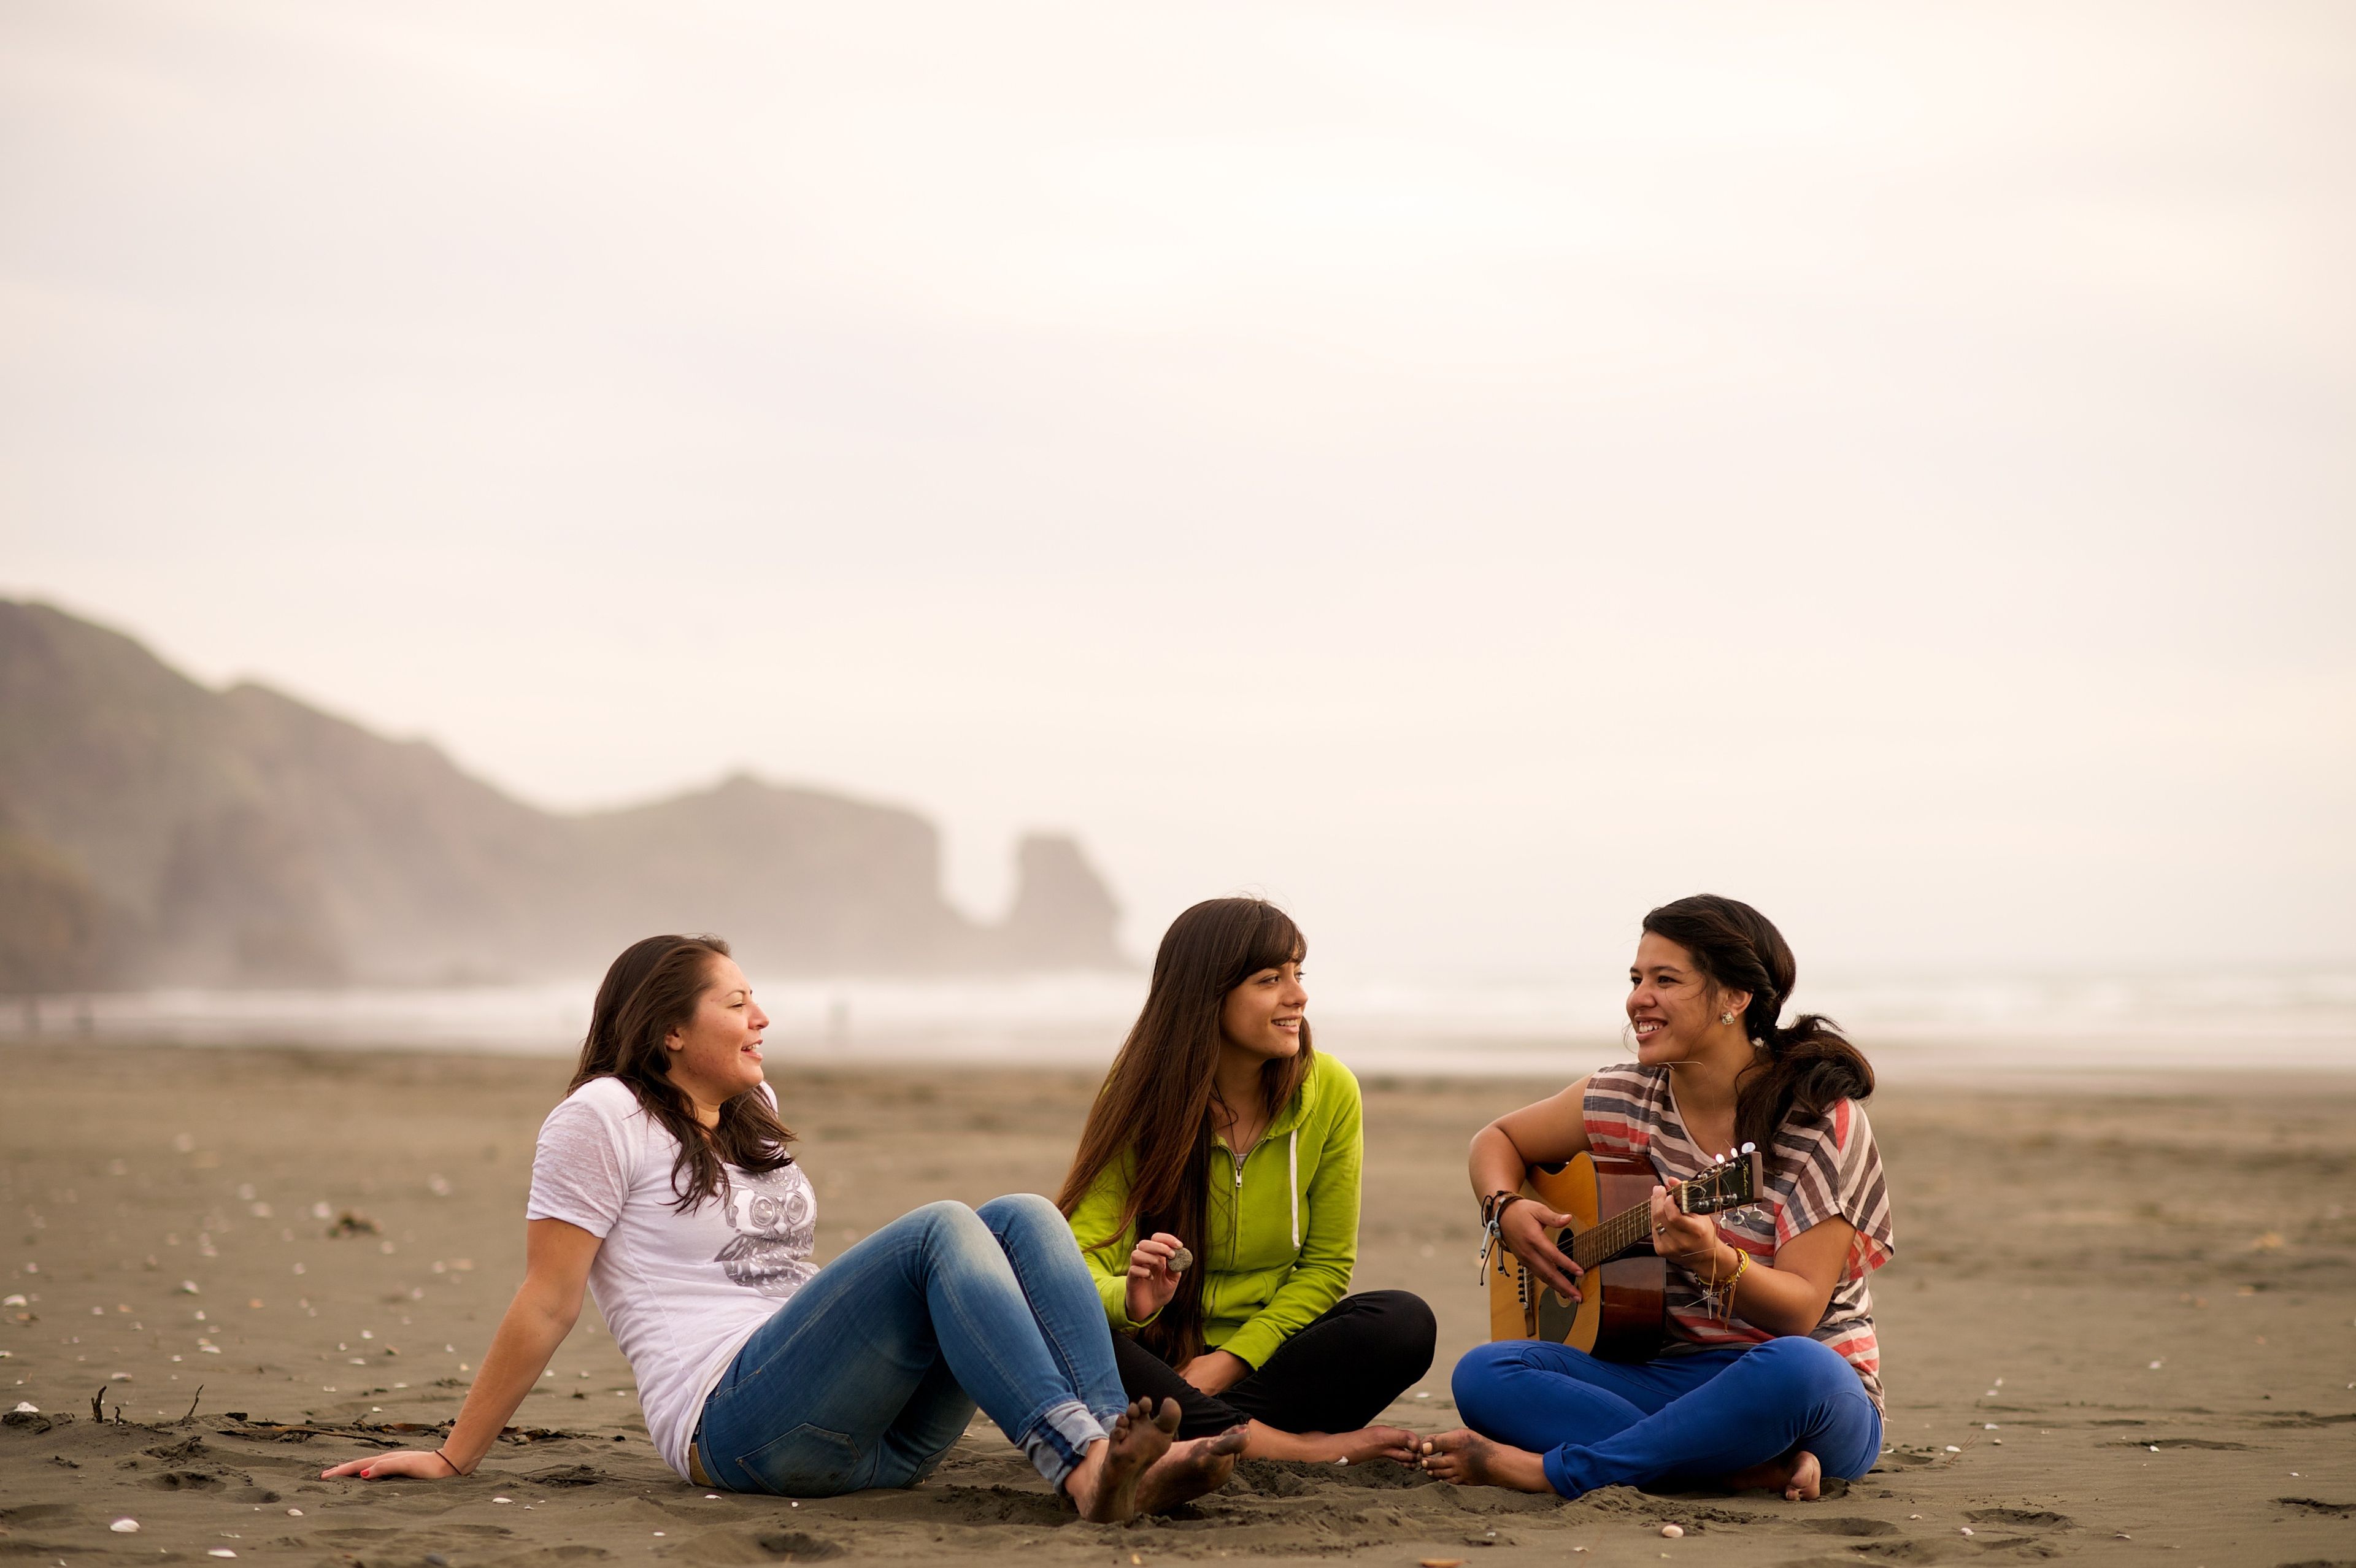 Three young women in New Zealand sit on the beach while one plays the guitar.